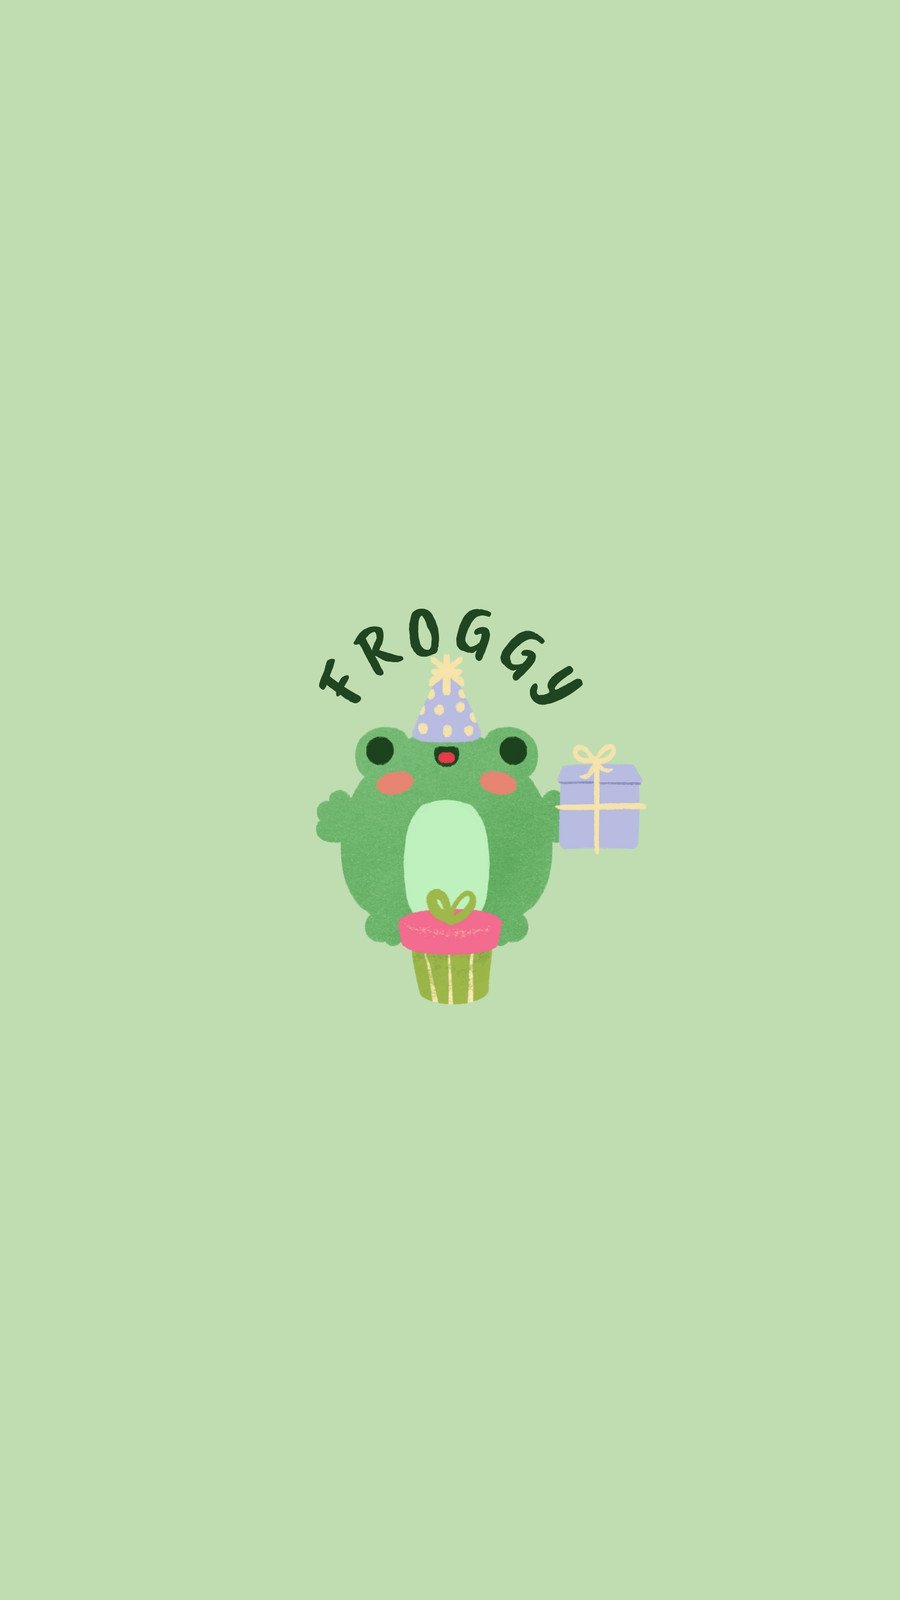 Froggy birthday theme with frog holding a gift - Frog